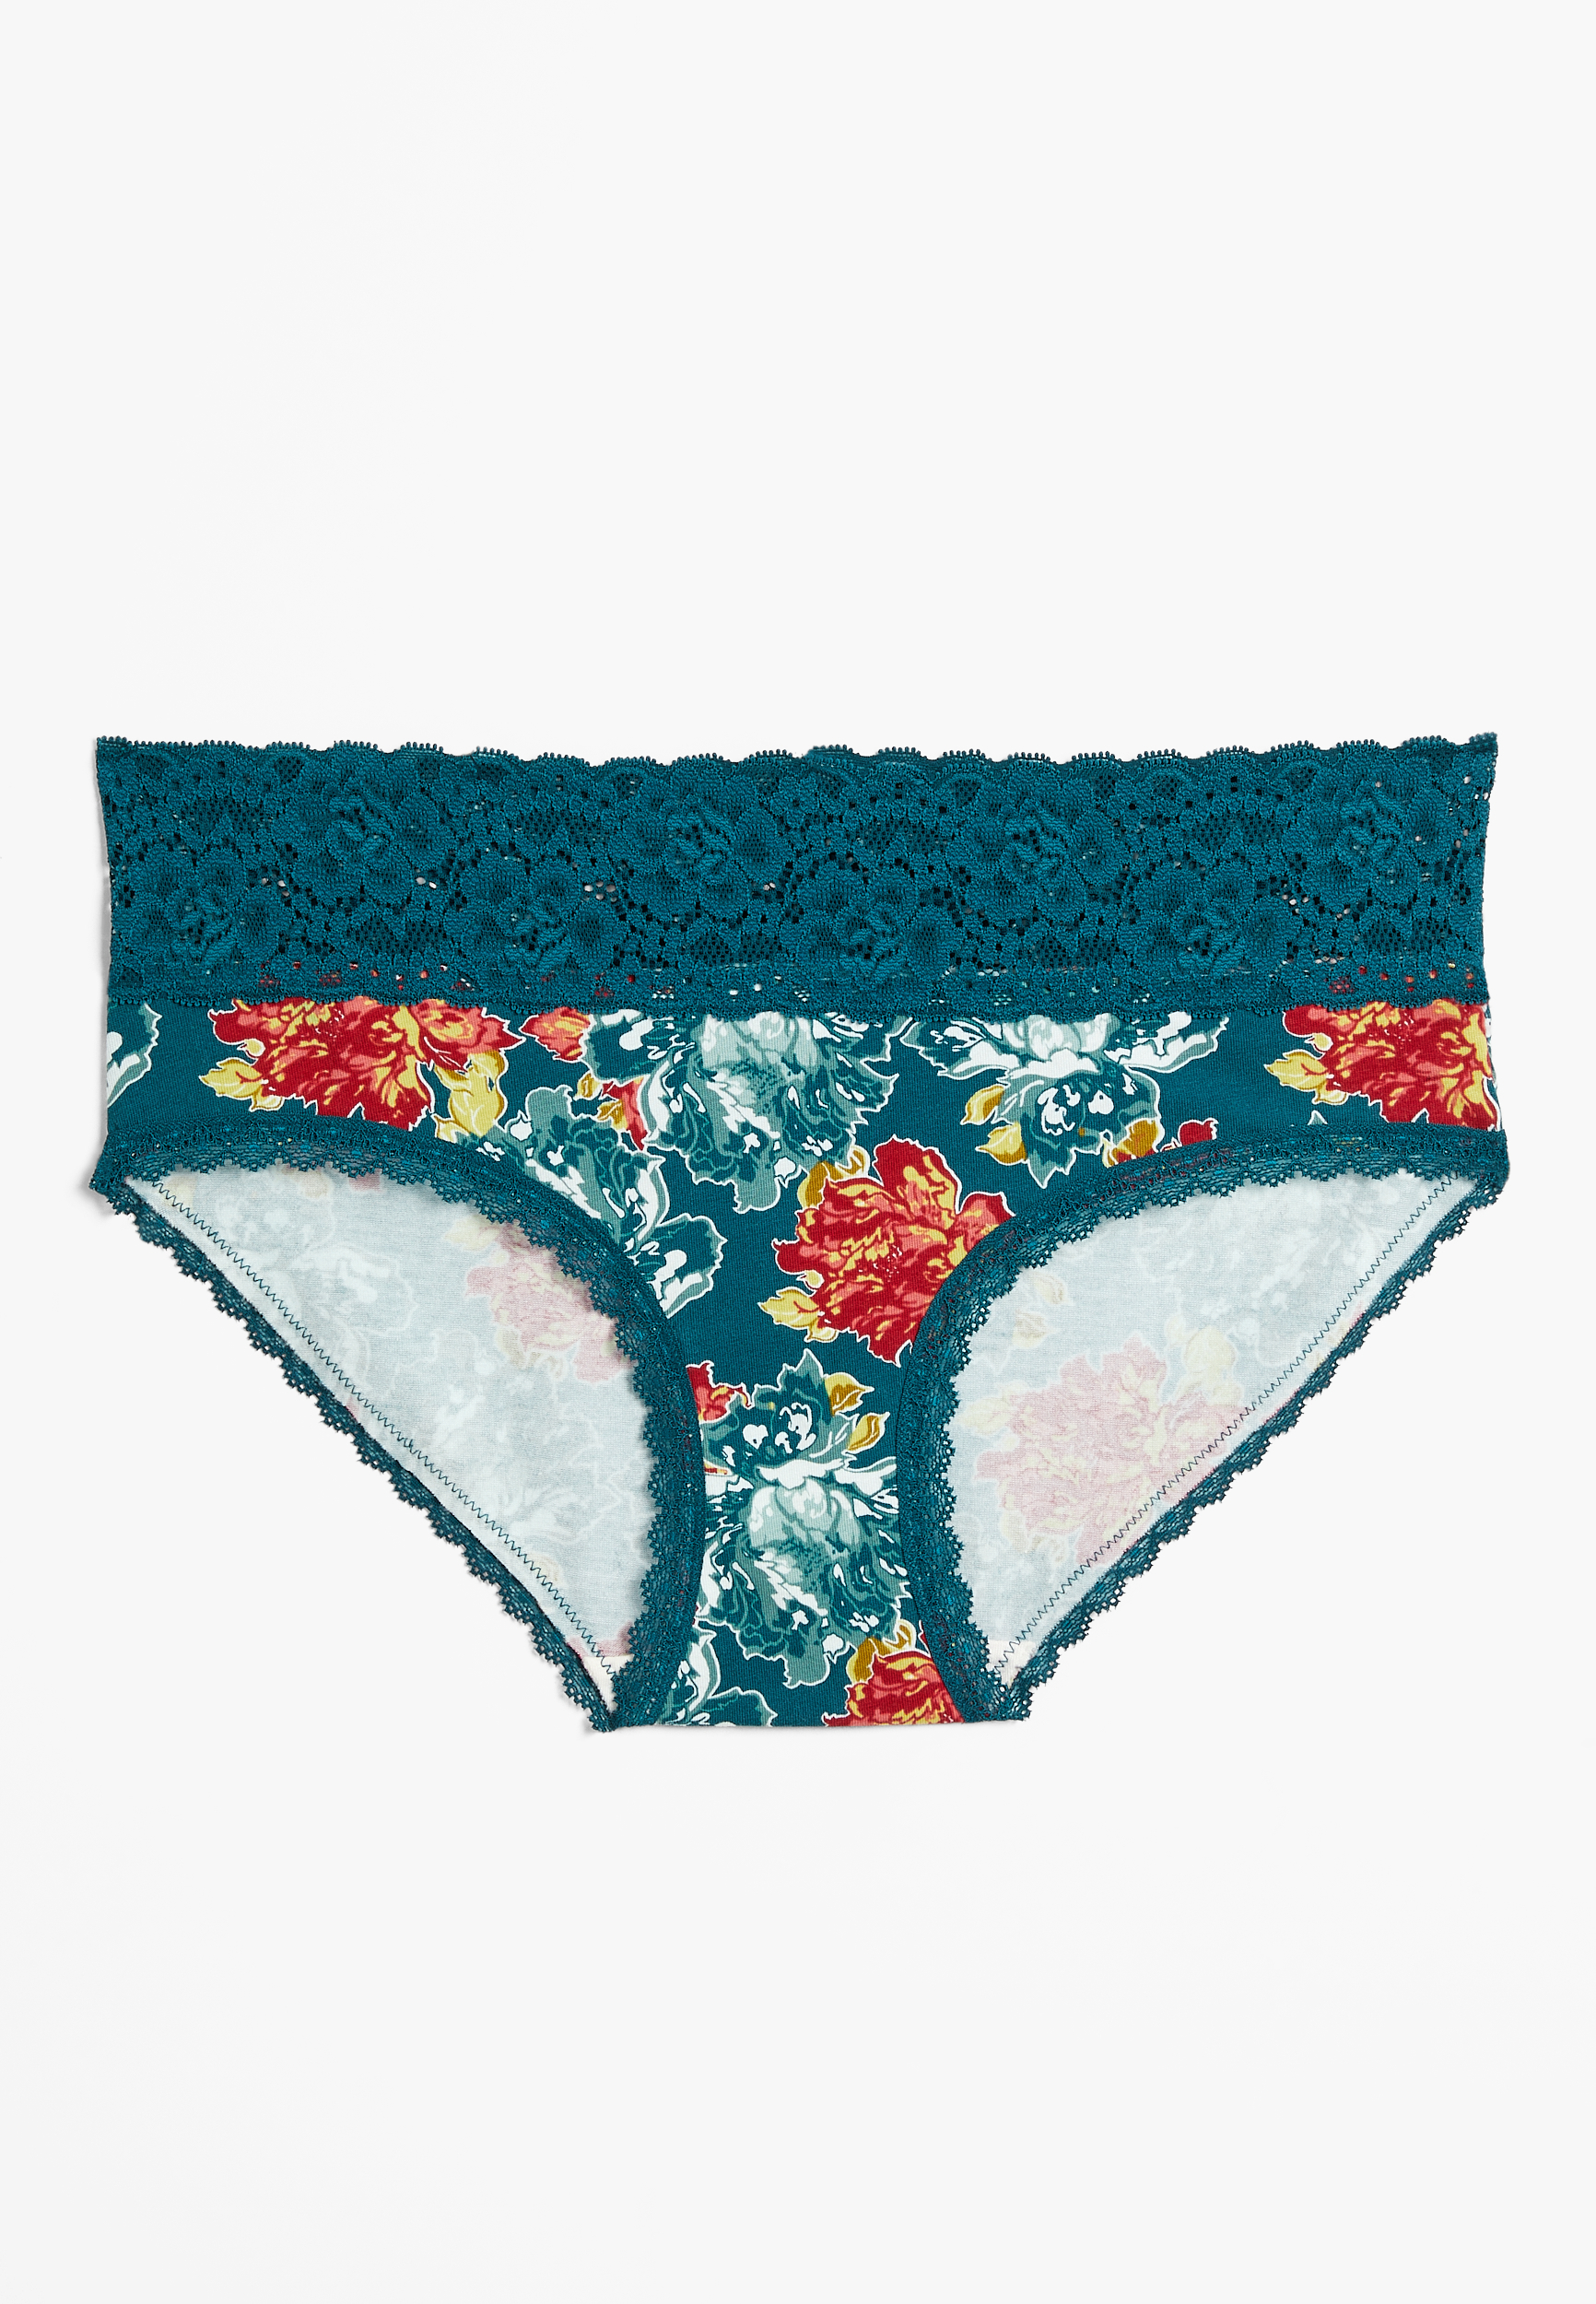 Simply Comfy Teal Floral Cotton Hipster Panty | maurices